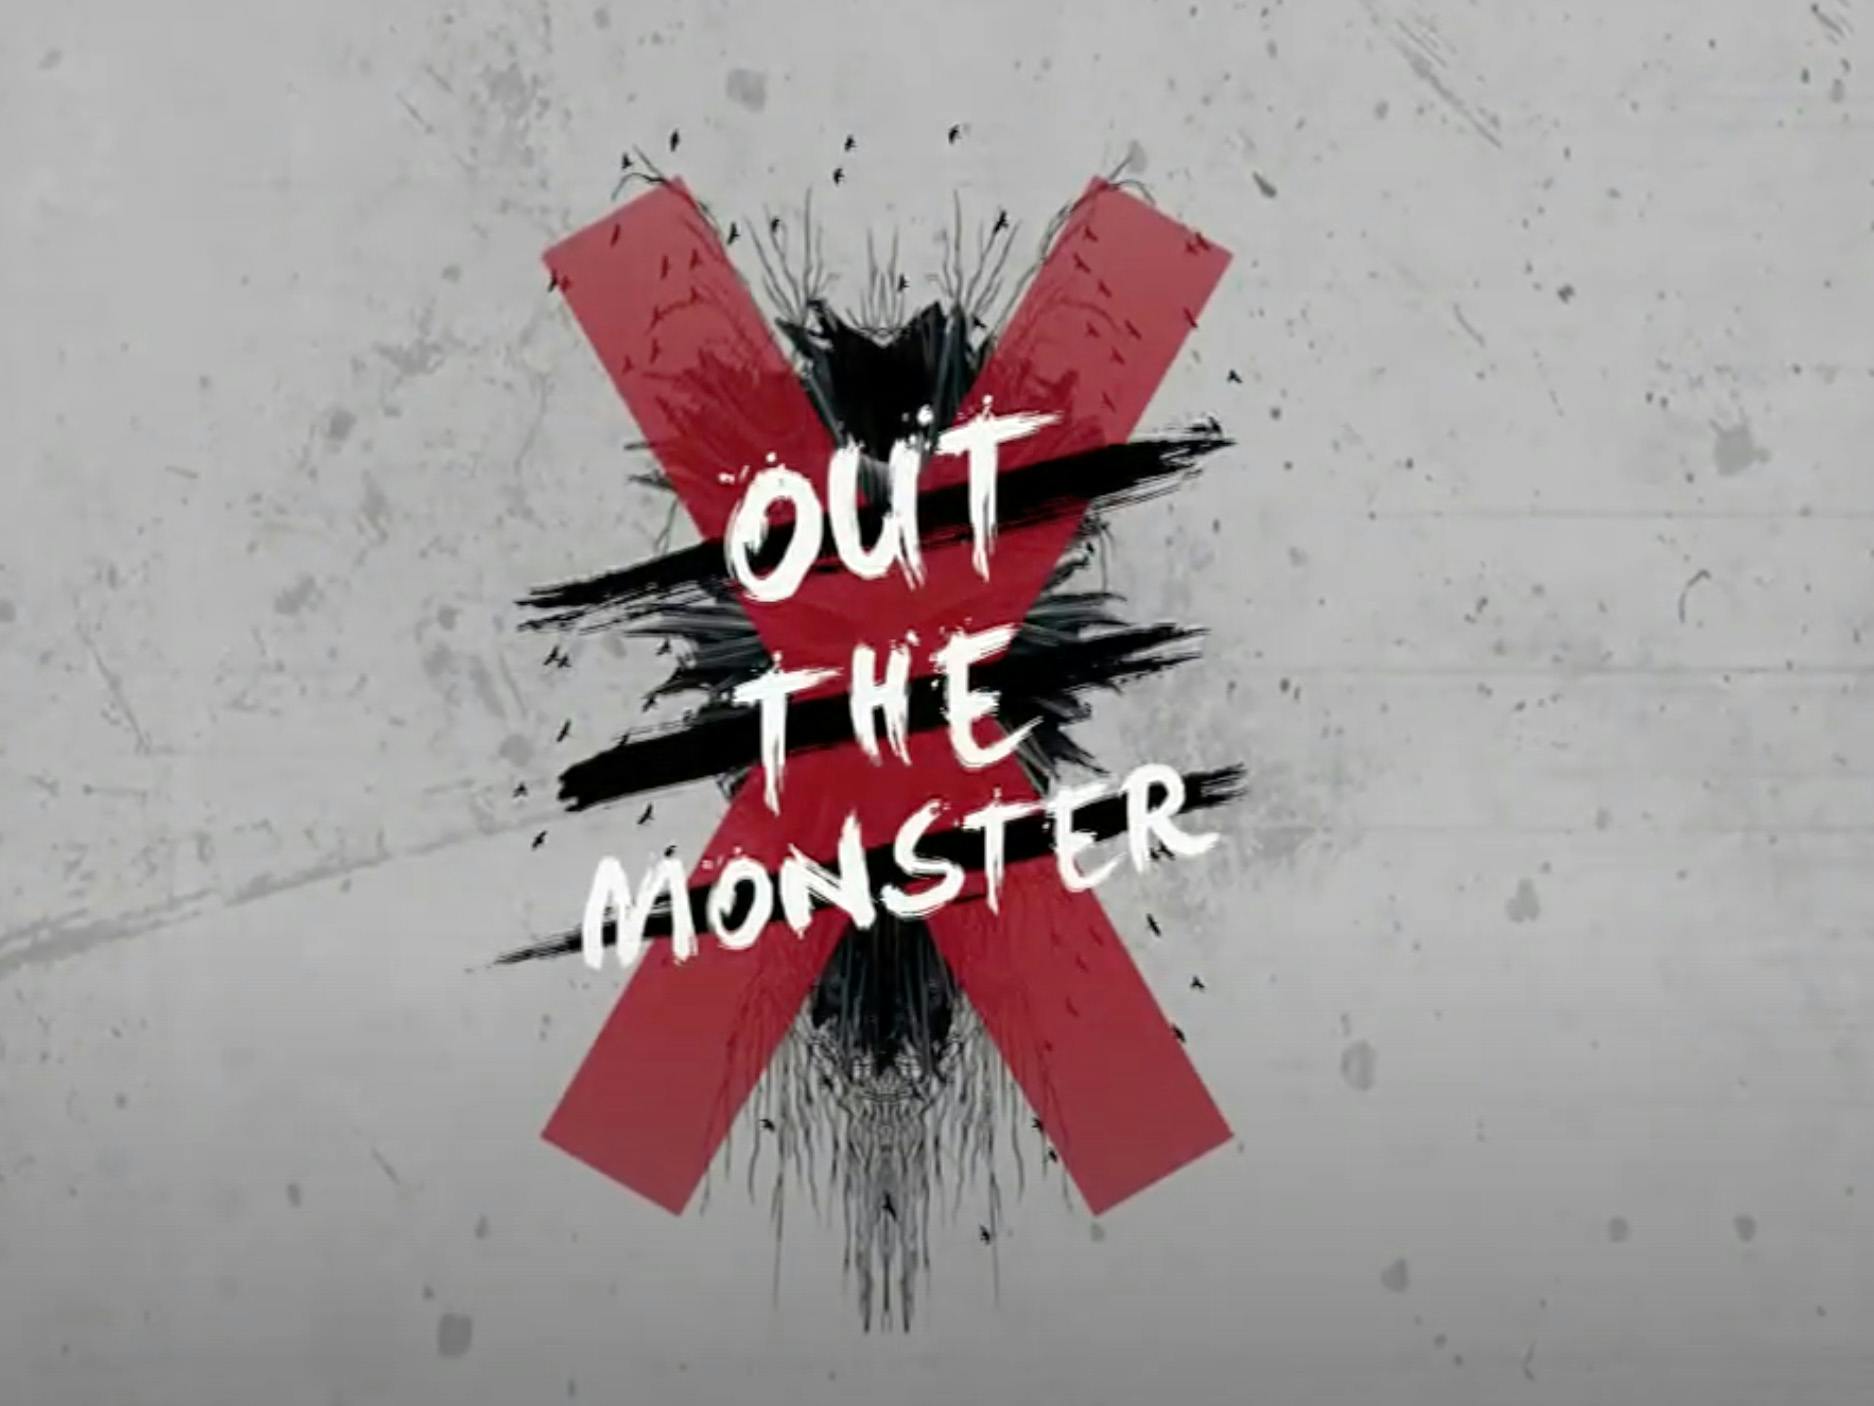 Text that reads “Out the Monster” in white, overlaid on a large, red “X.”